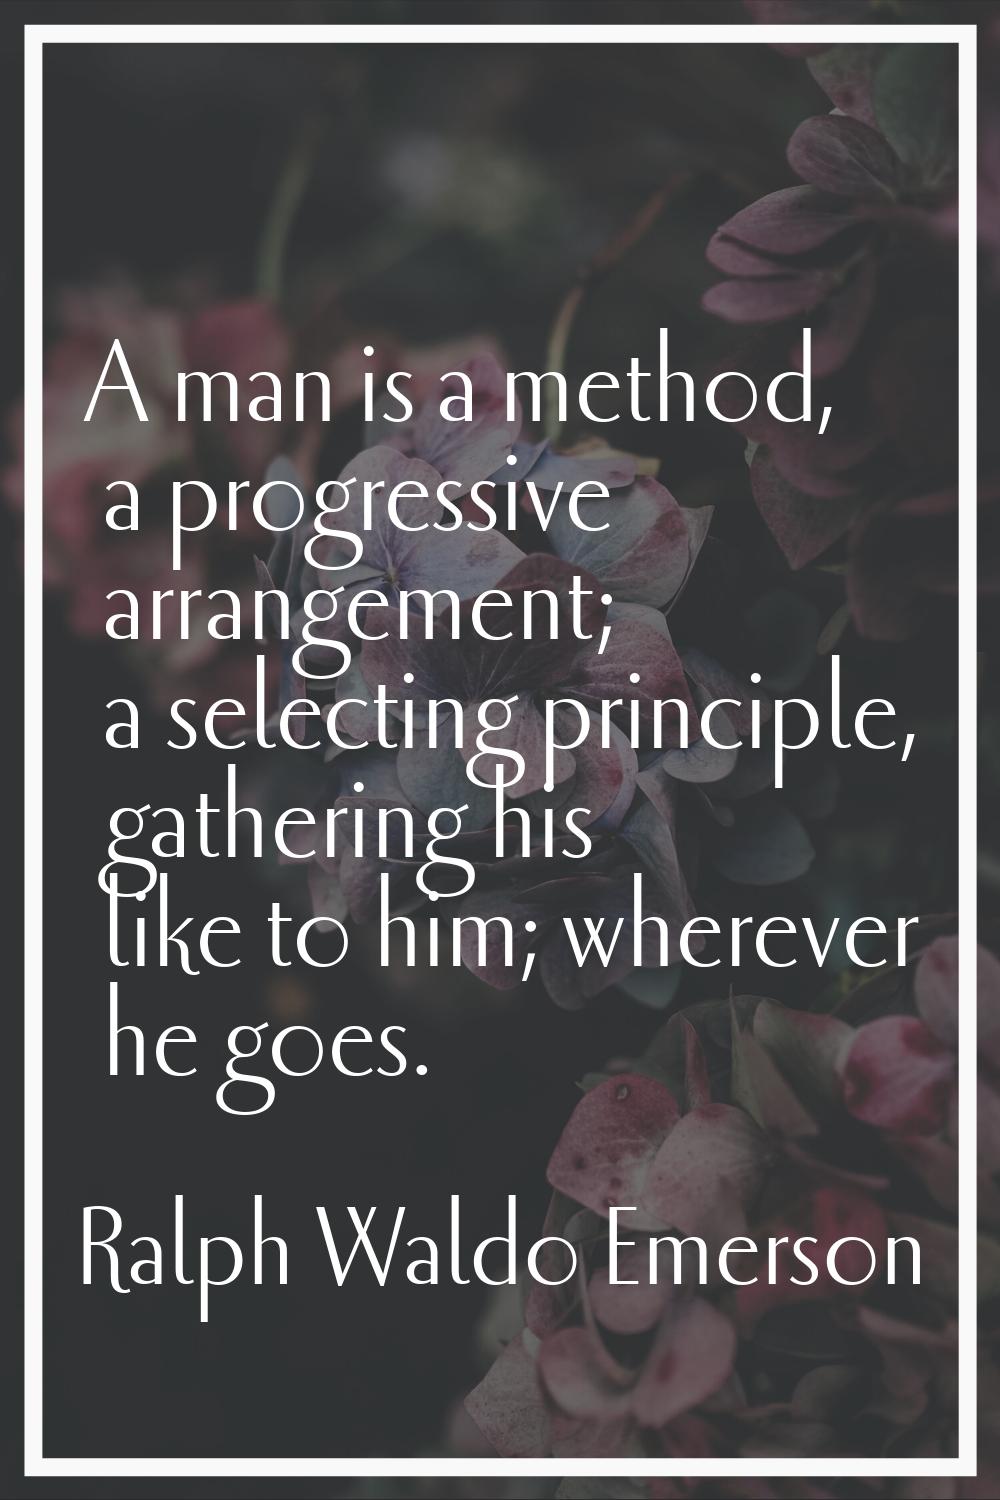 A man is a method, a progressive arrangement; a selecting principle, gathering his like to him; whe